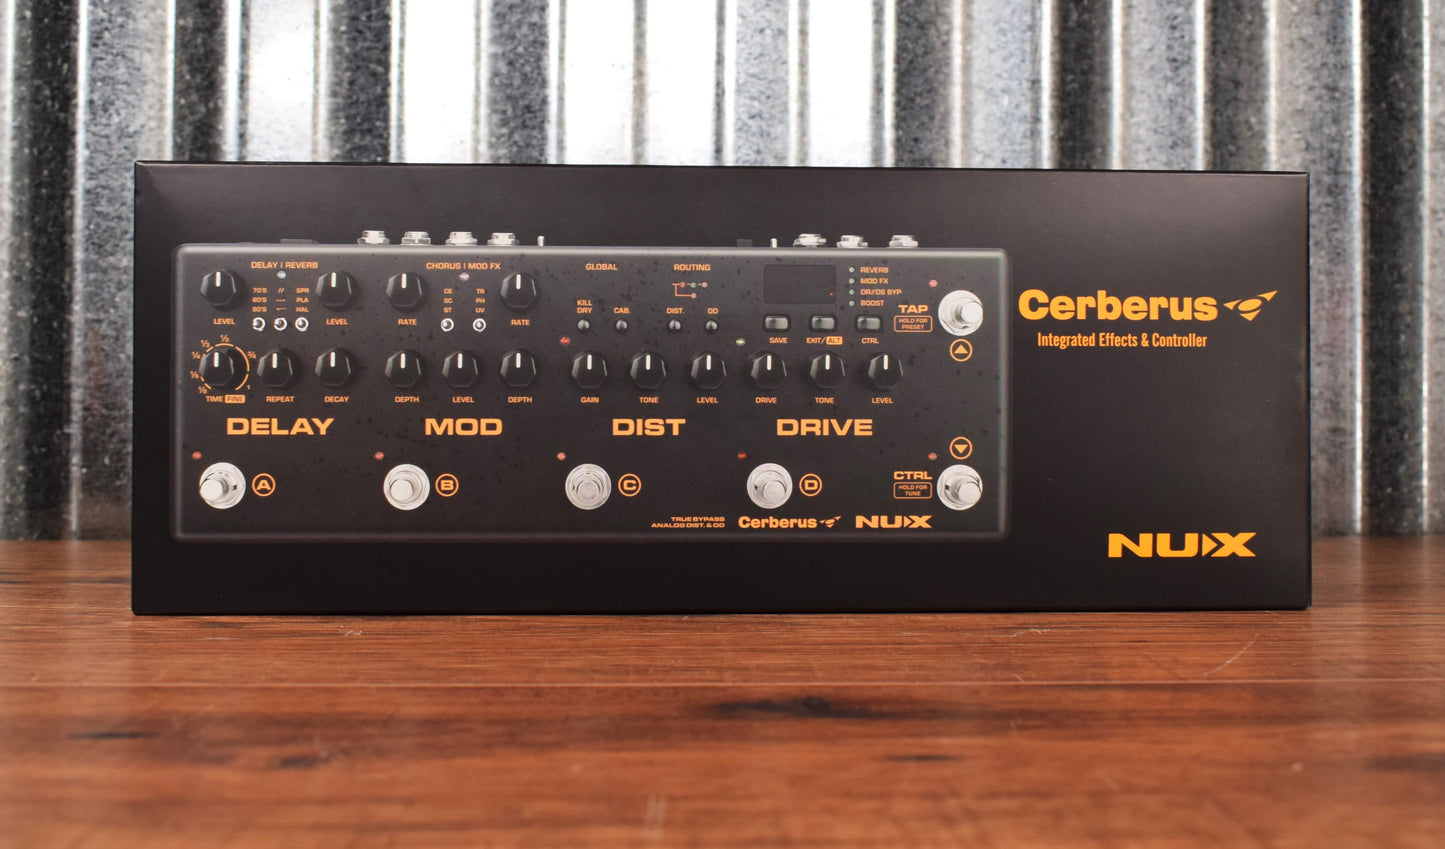 NUX Cerberus Programmable Multi-Effect Delay Modulation Distortion Overdrive Guitar Effect Pedal Demo